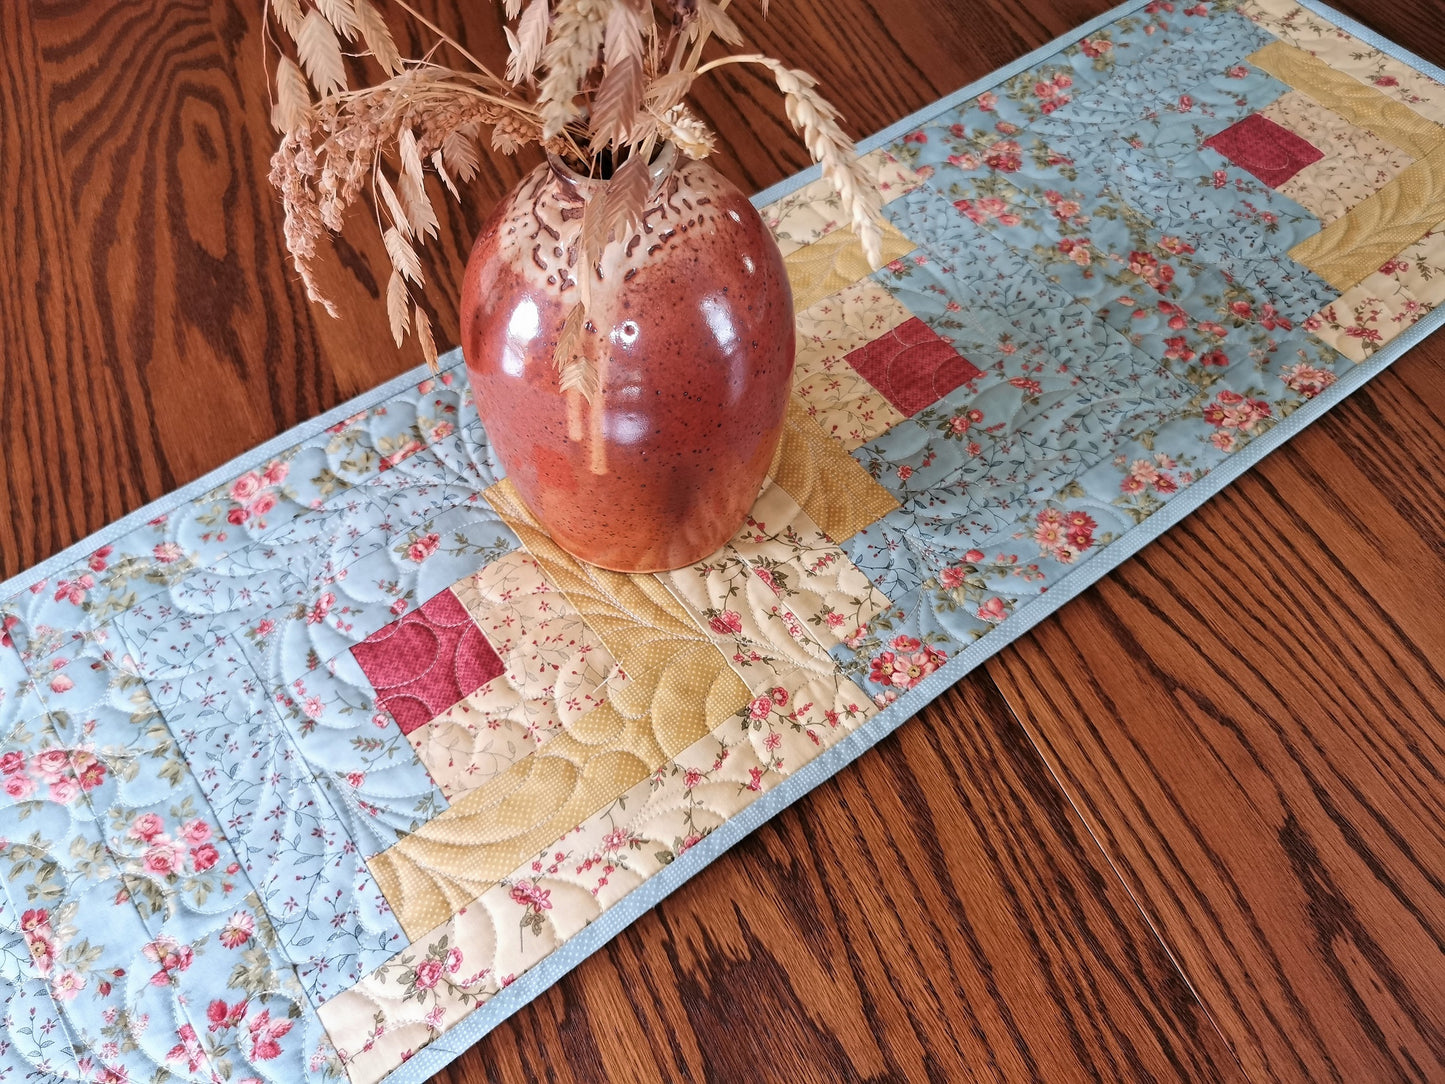 This quilted log cabin table runner features floral fabrics in soft colors. Coordinating fabrics are teal blues, golden yellows with a touch of coral pink.  